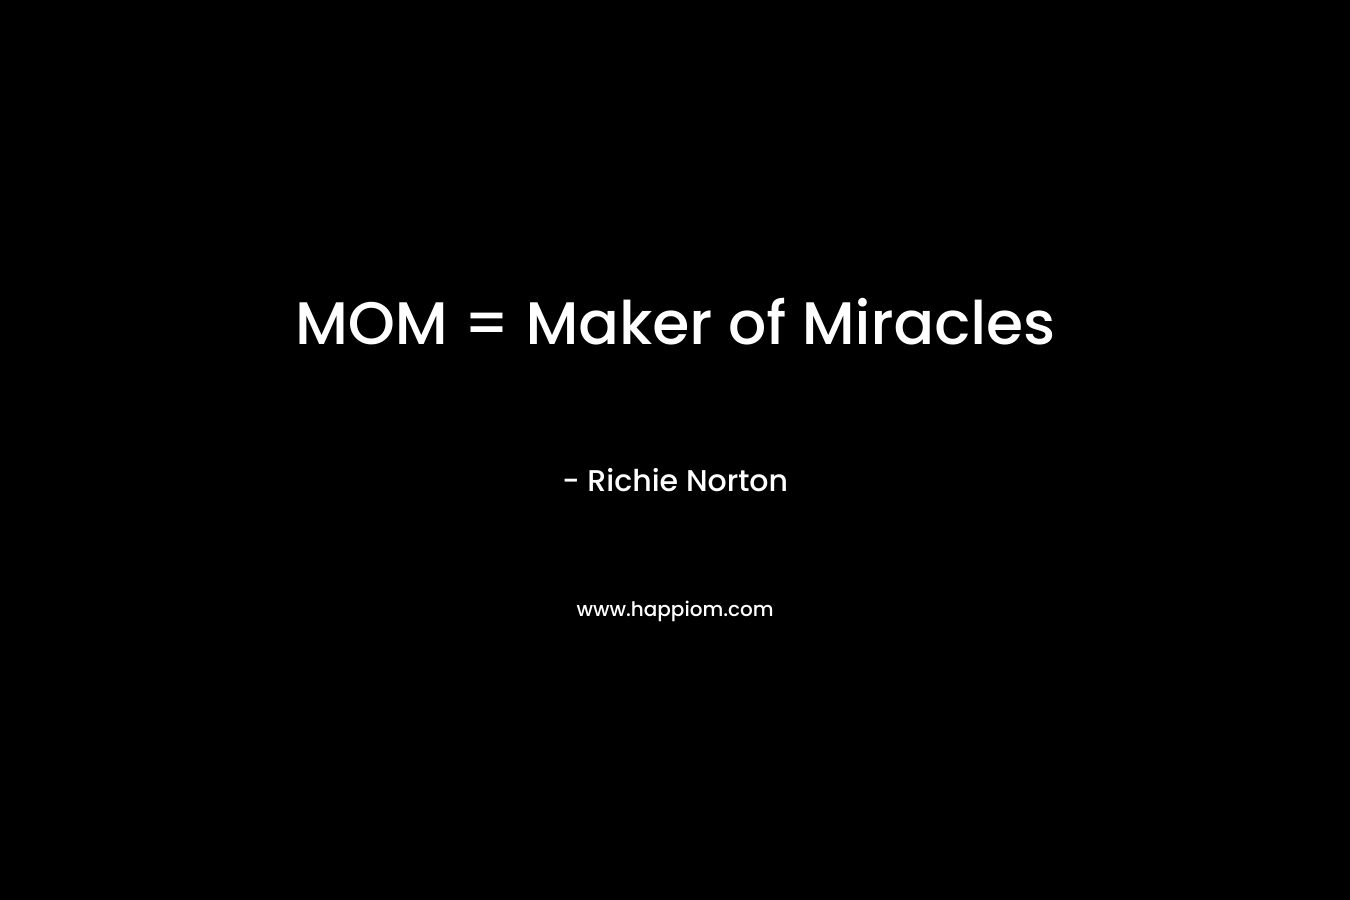 MOM = Maker of Miracles